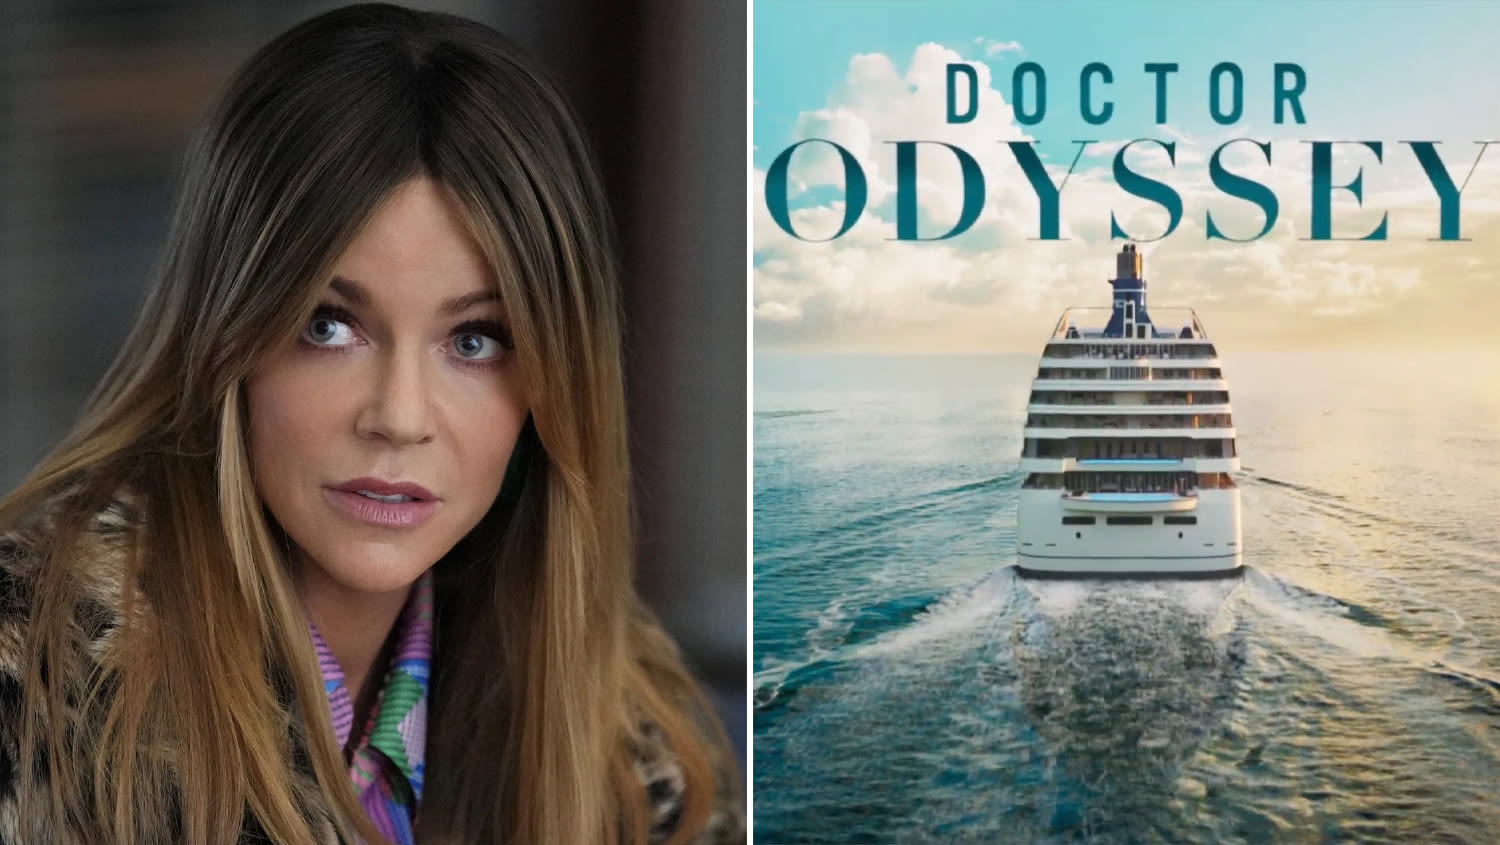 ABC New Series Teasers: ‘High Potential’, ‘Doctor Odyssey’